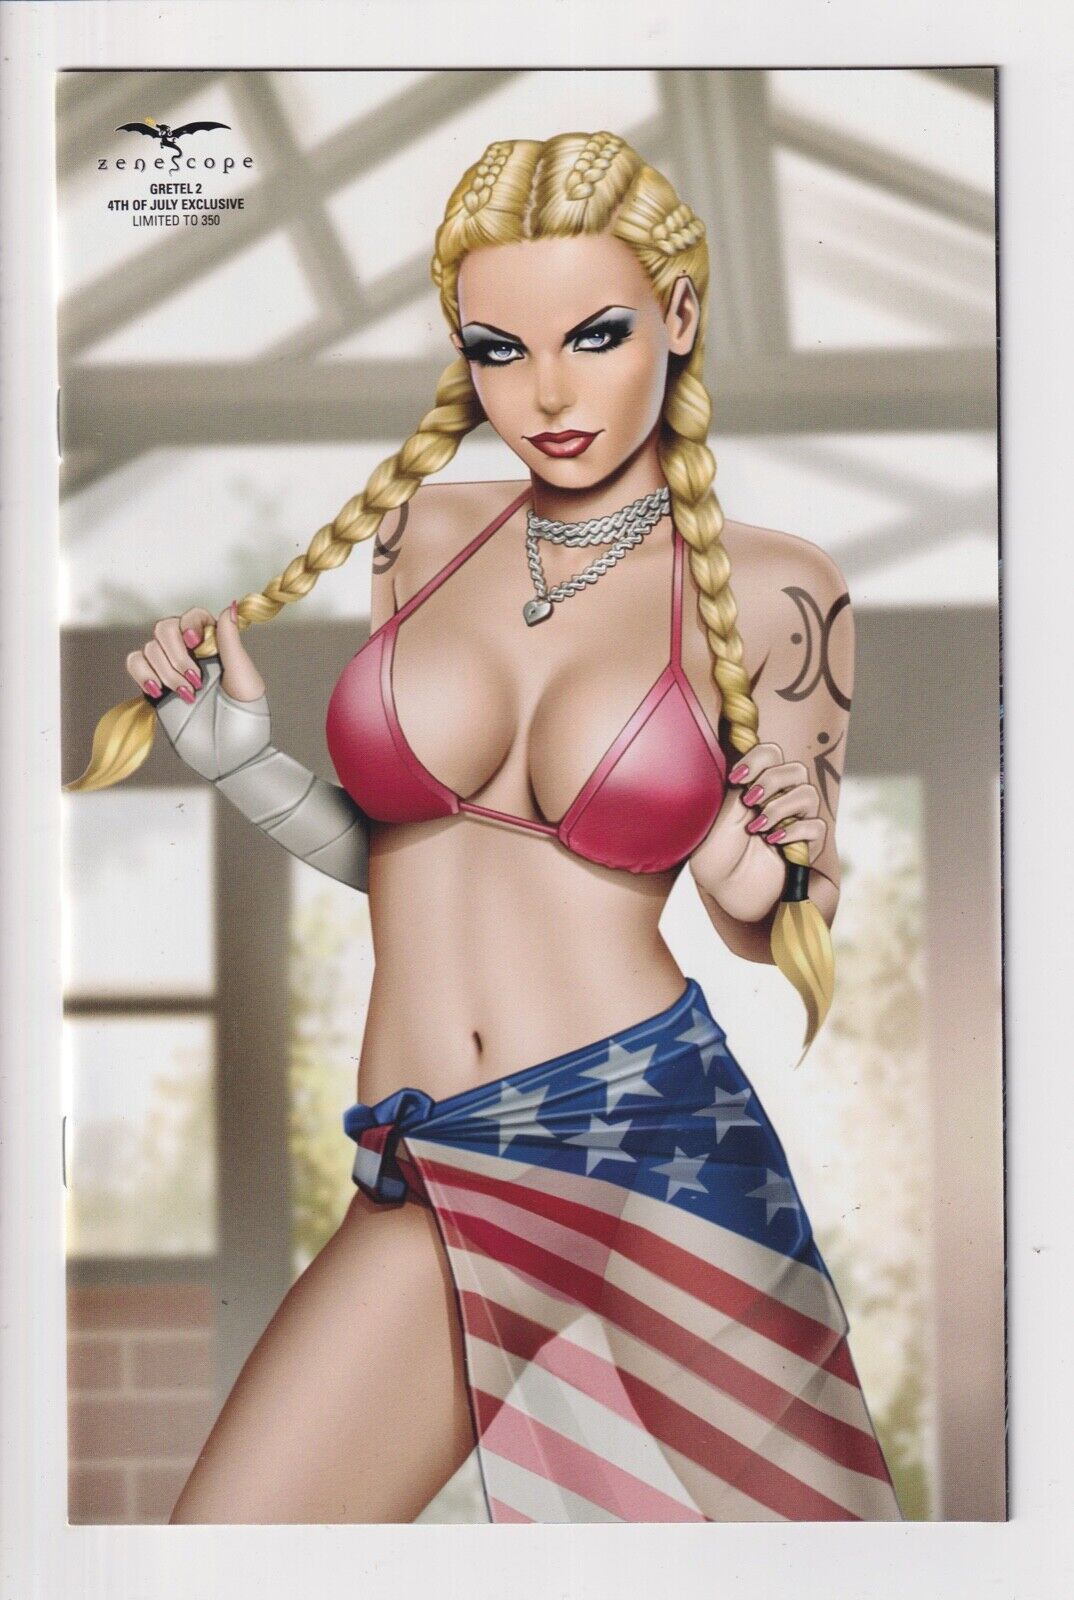 GRETEL 1-4 NM 2019 Zenescope sold SEPARATELY you PICK LIMITED EDITION VAR